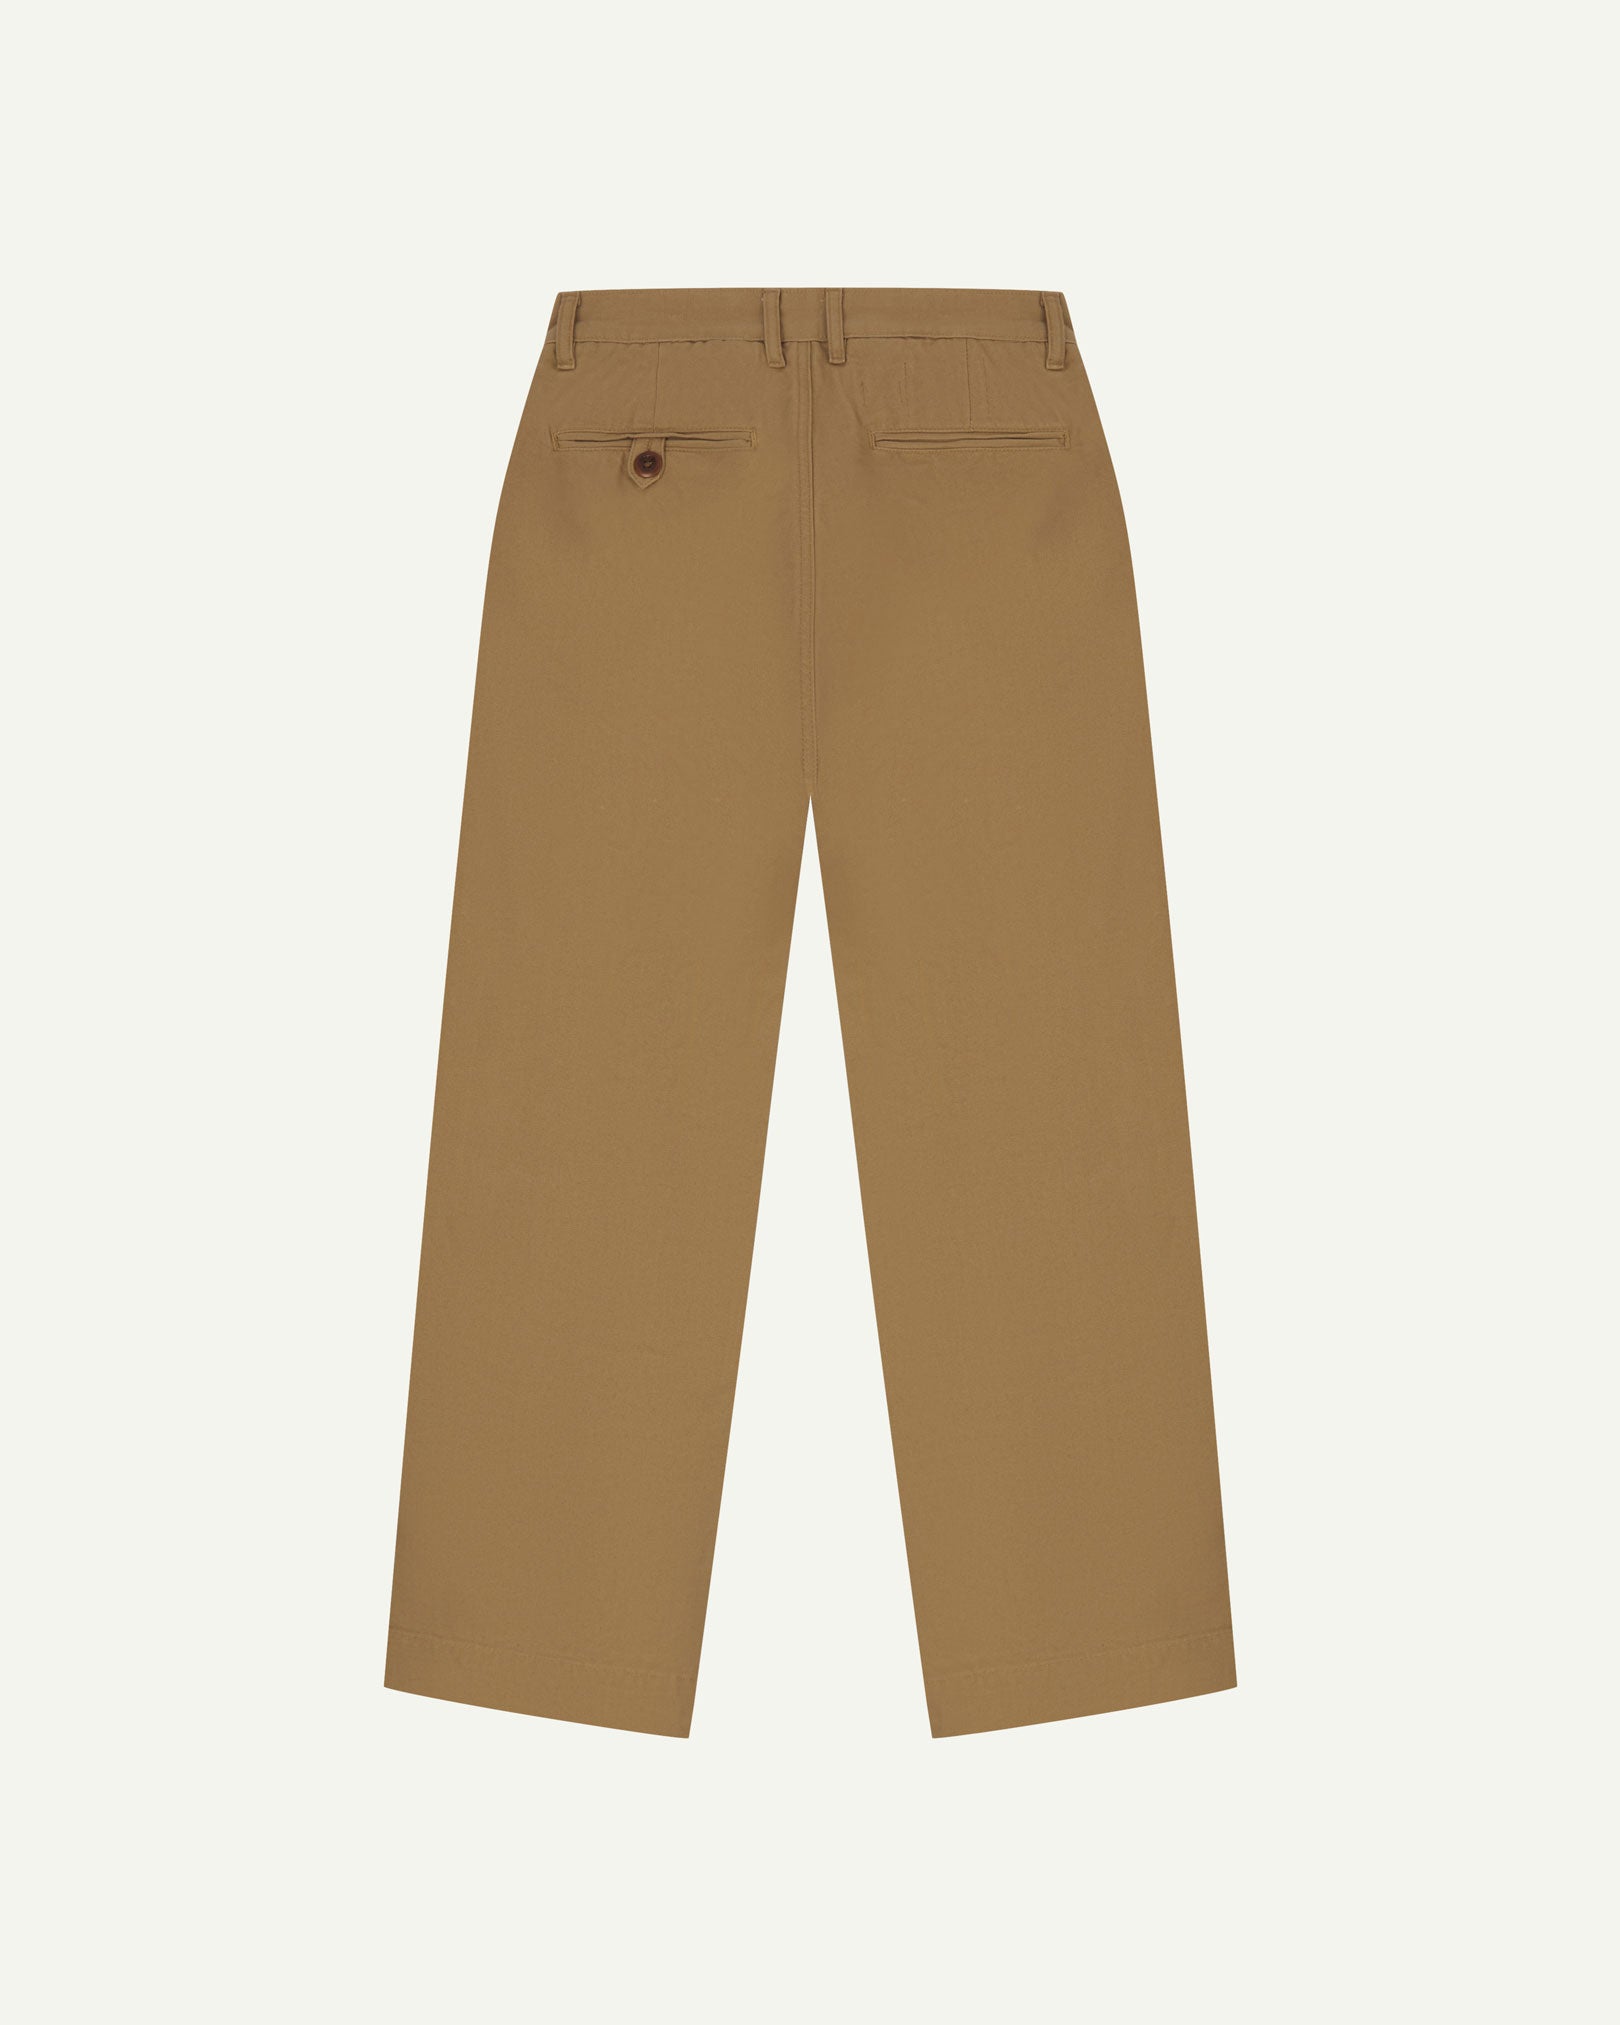 Back view of 5018 Uskees men's organic mid-weight cotton boat trousers in khaki showing wide leg style and buttoned back pocket.